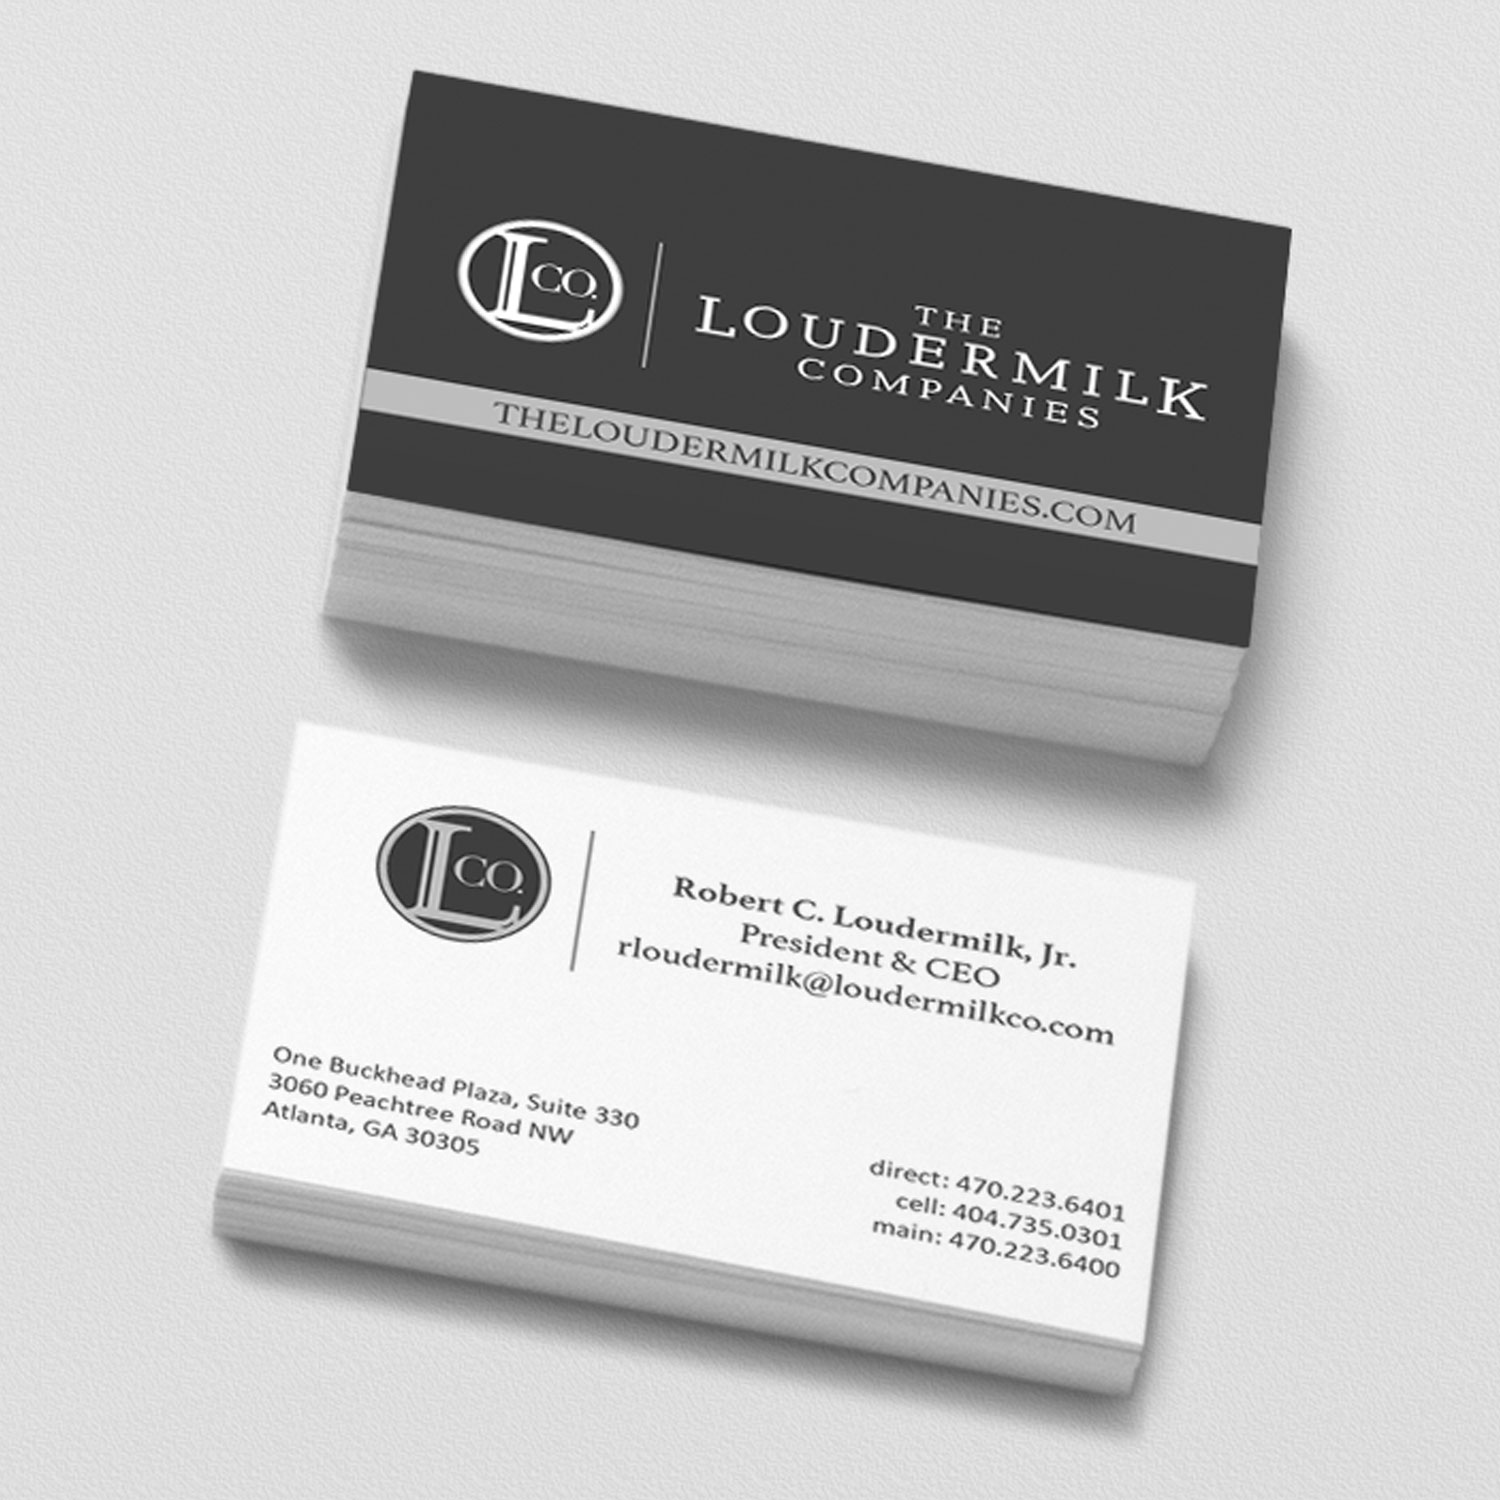 mvo-marketing-creative-digital-strategy-agency-roswell-ga-featured-work-commercial-real-estate-loudermilk-companies-brand-business-cards